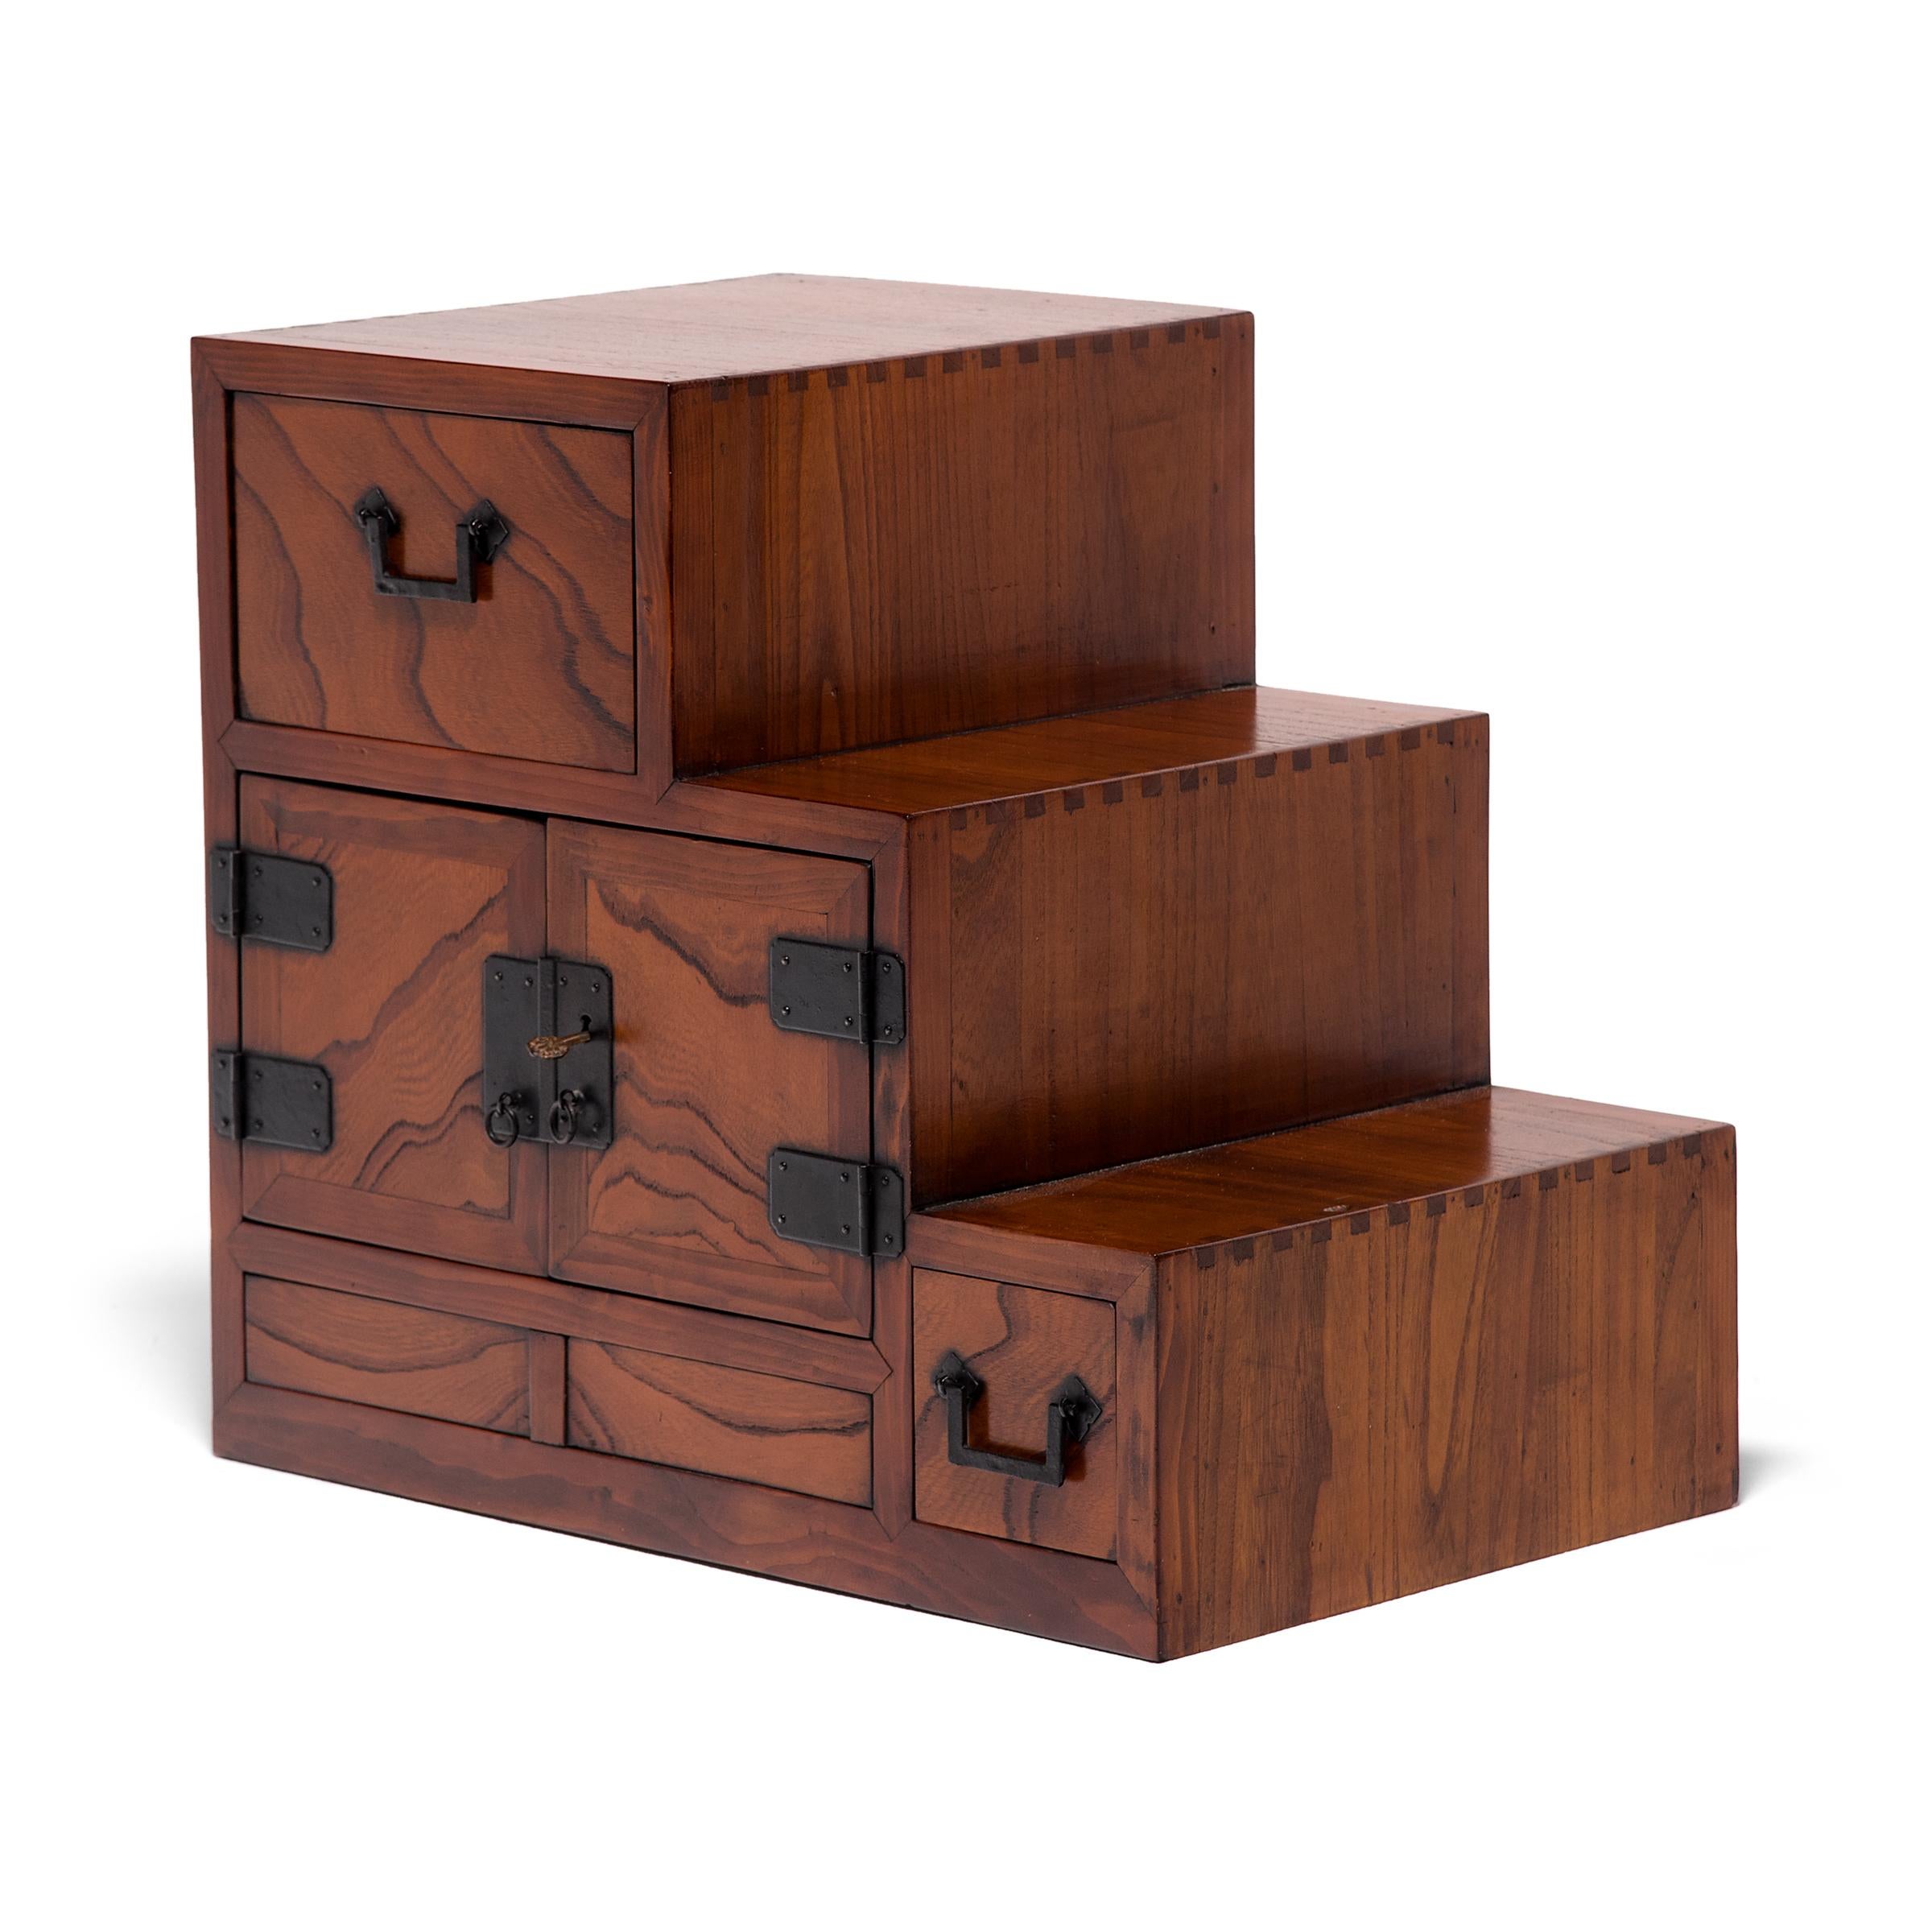 Designed to be versatile and portable, Japanese tansu chests were multipurpose storage cabinets that moved throughout the home as needed. This petite chest was originally the upper compartment of a large step tansu, known as kaidan-dansu, which